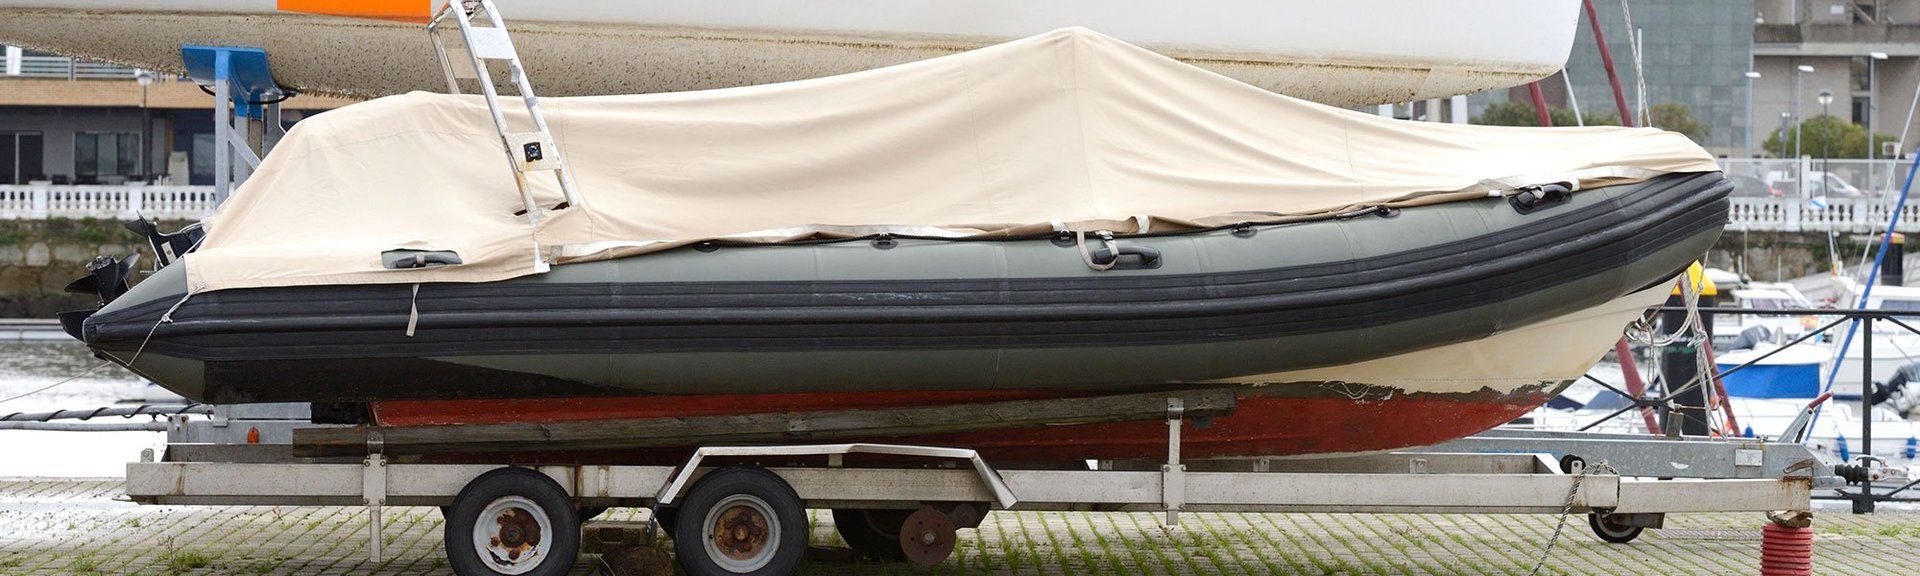 Boat and Trailer Repair Services